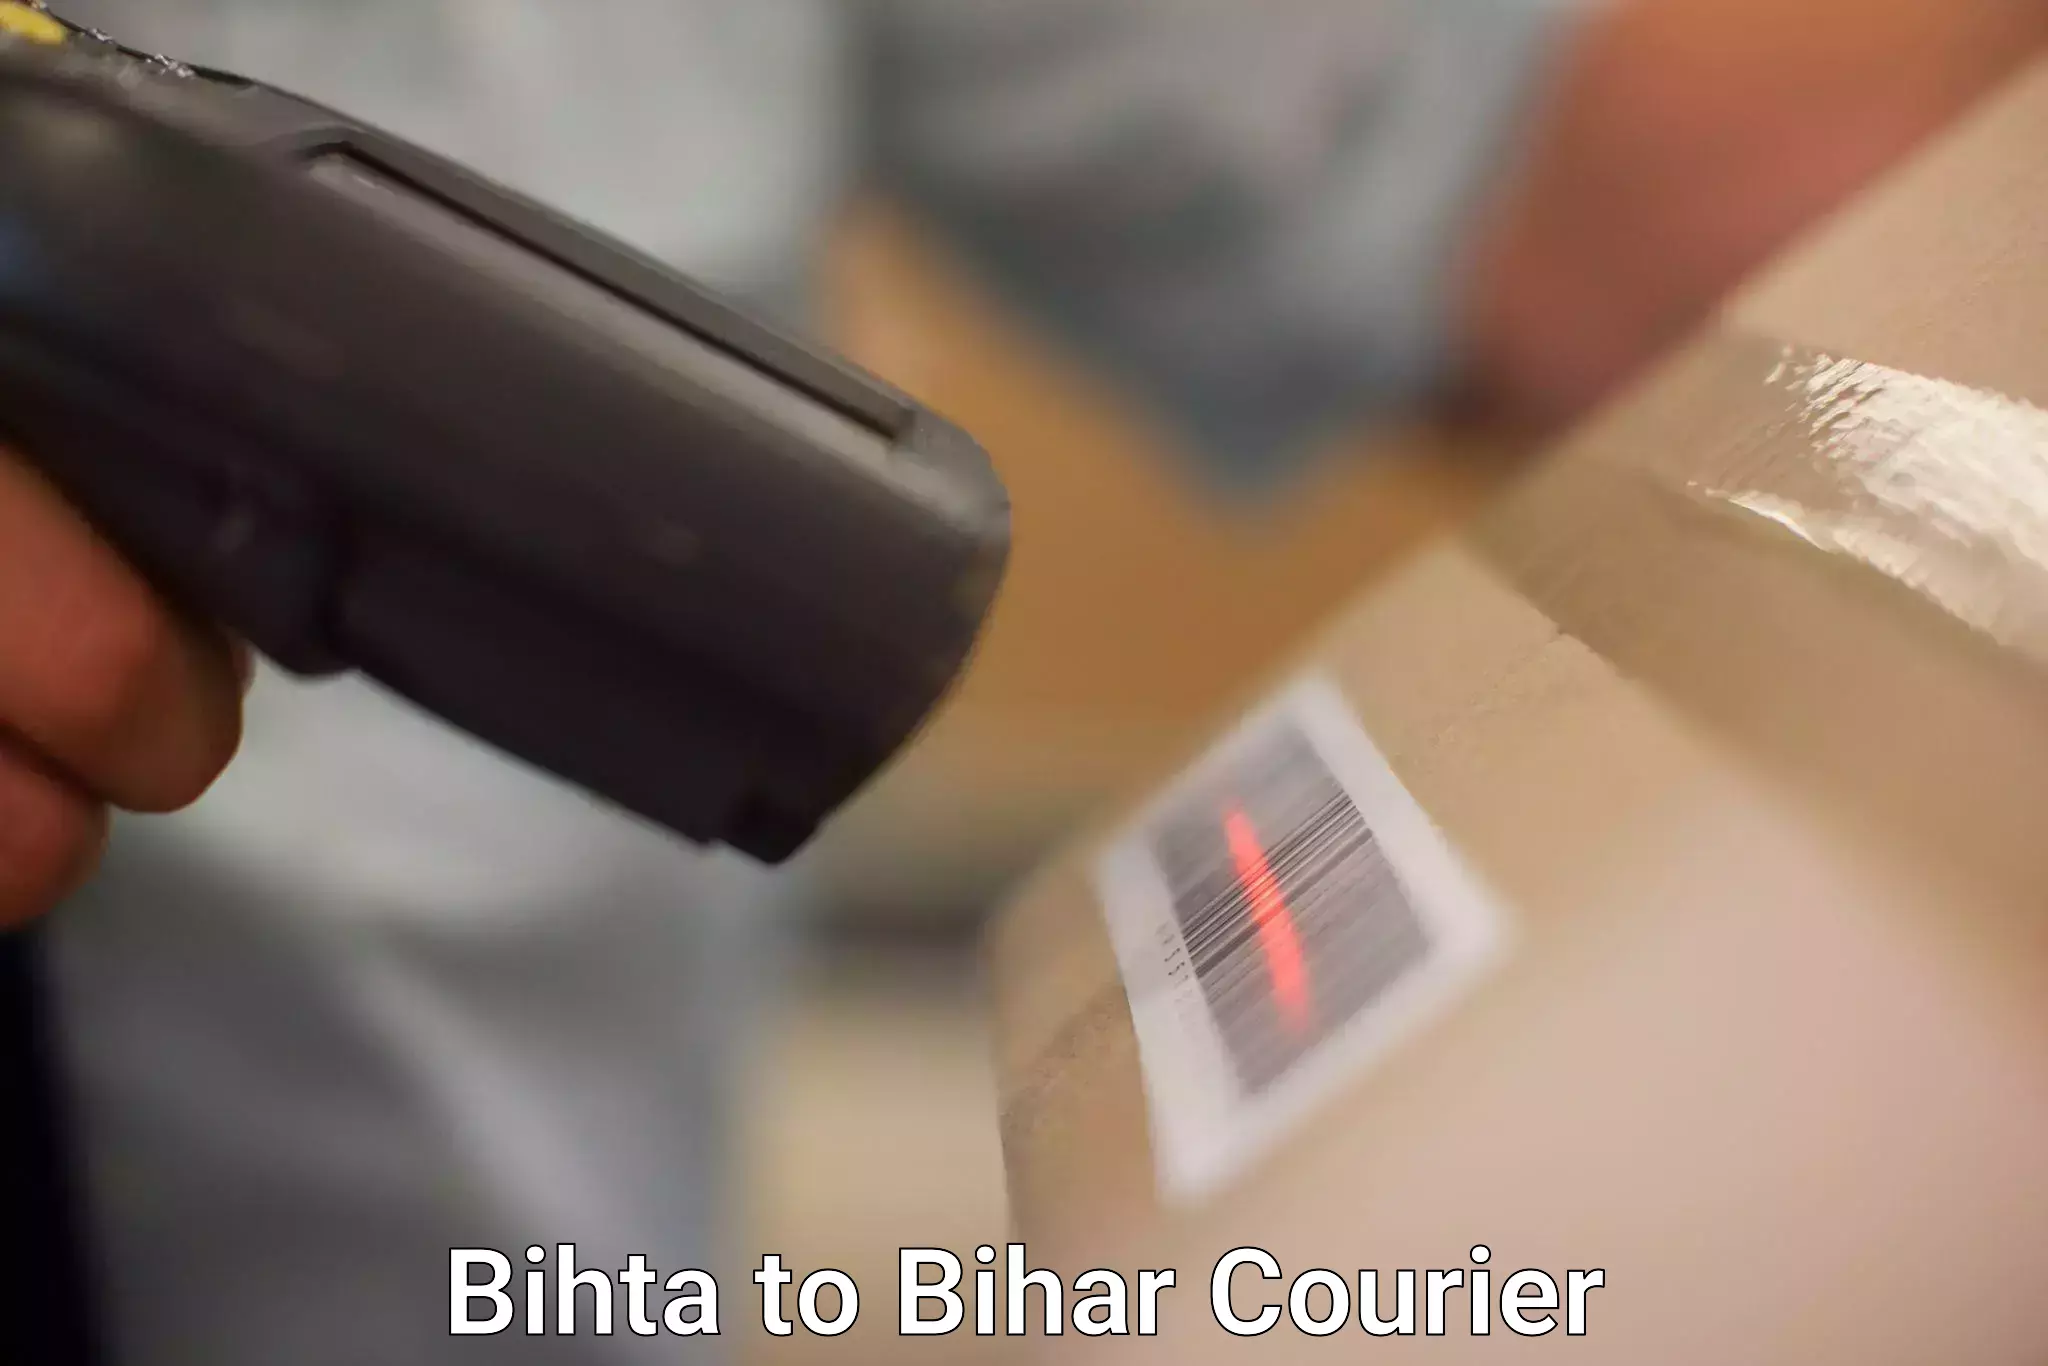 Fragile item shipping in Bihta to Fatwah